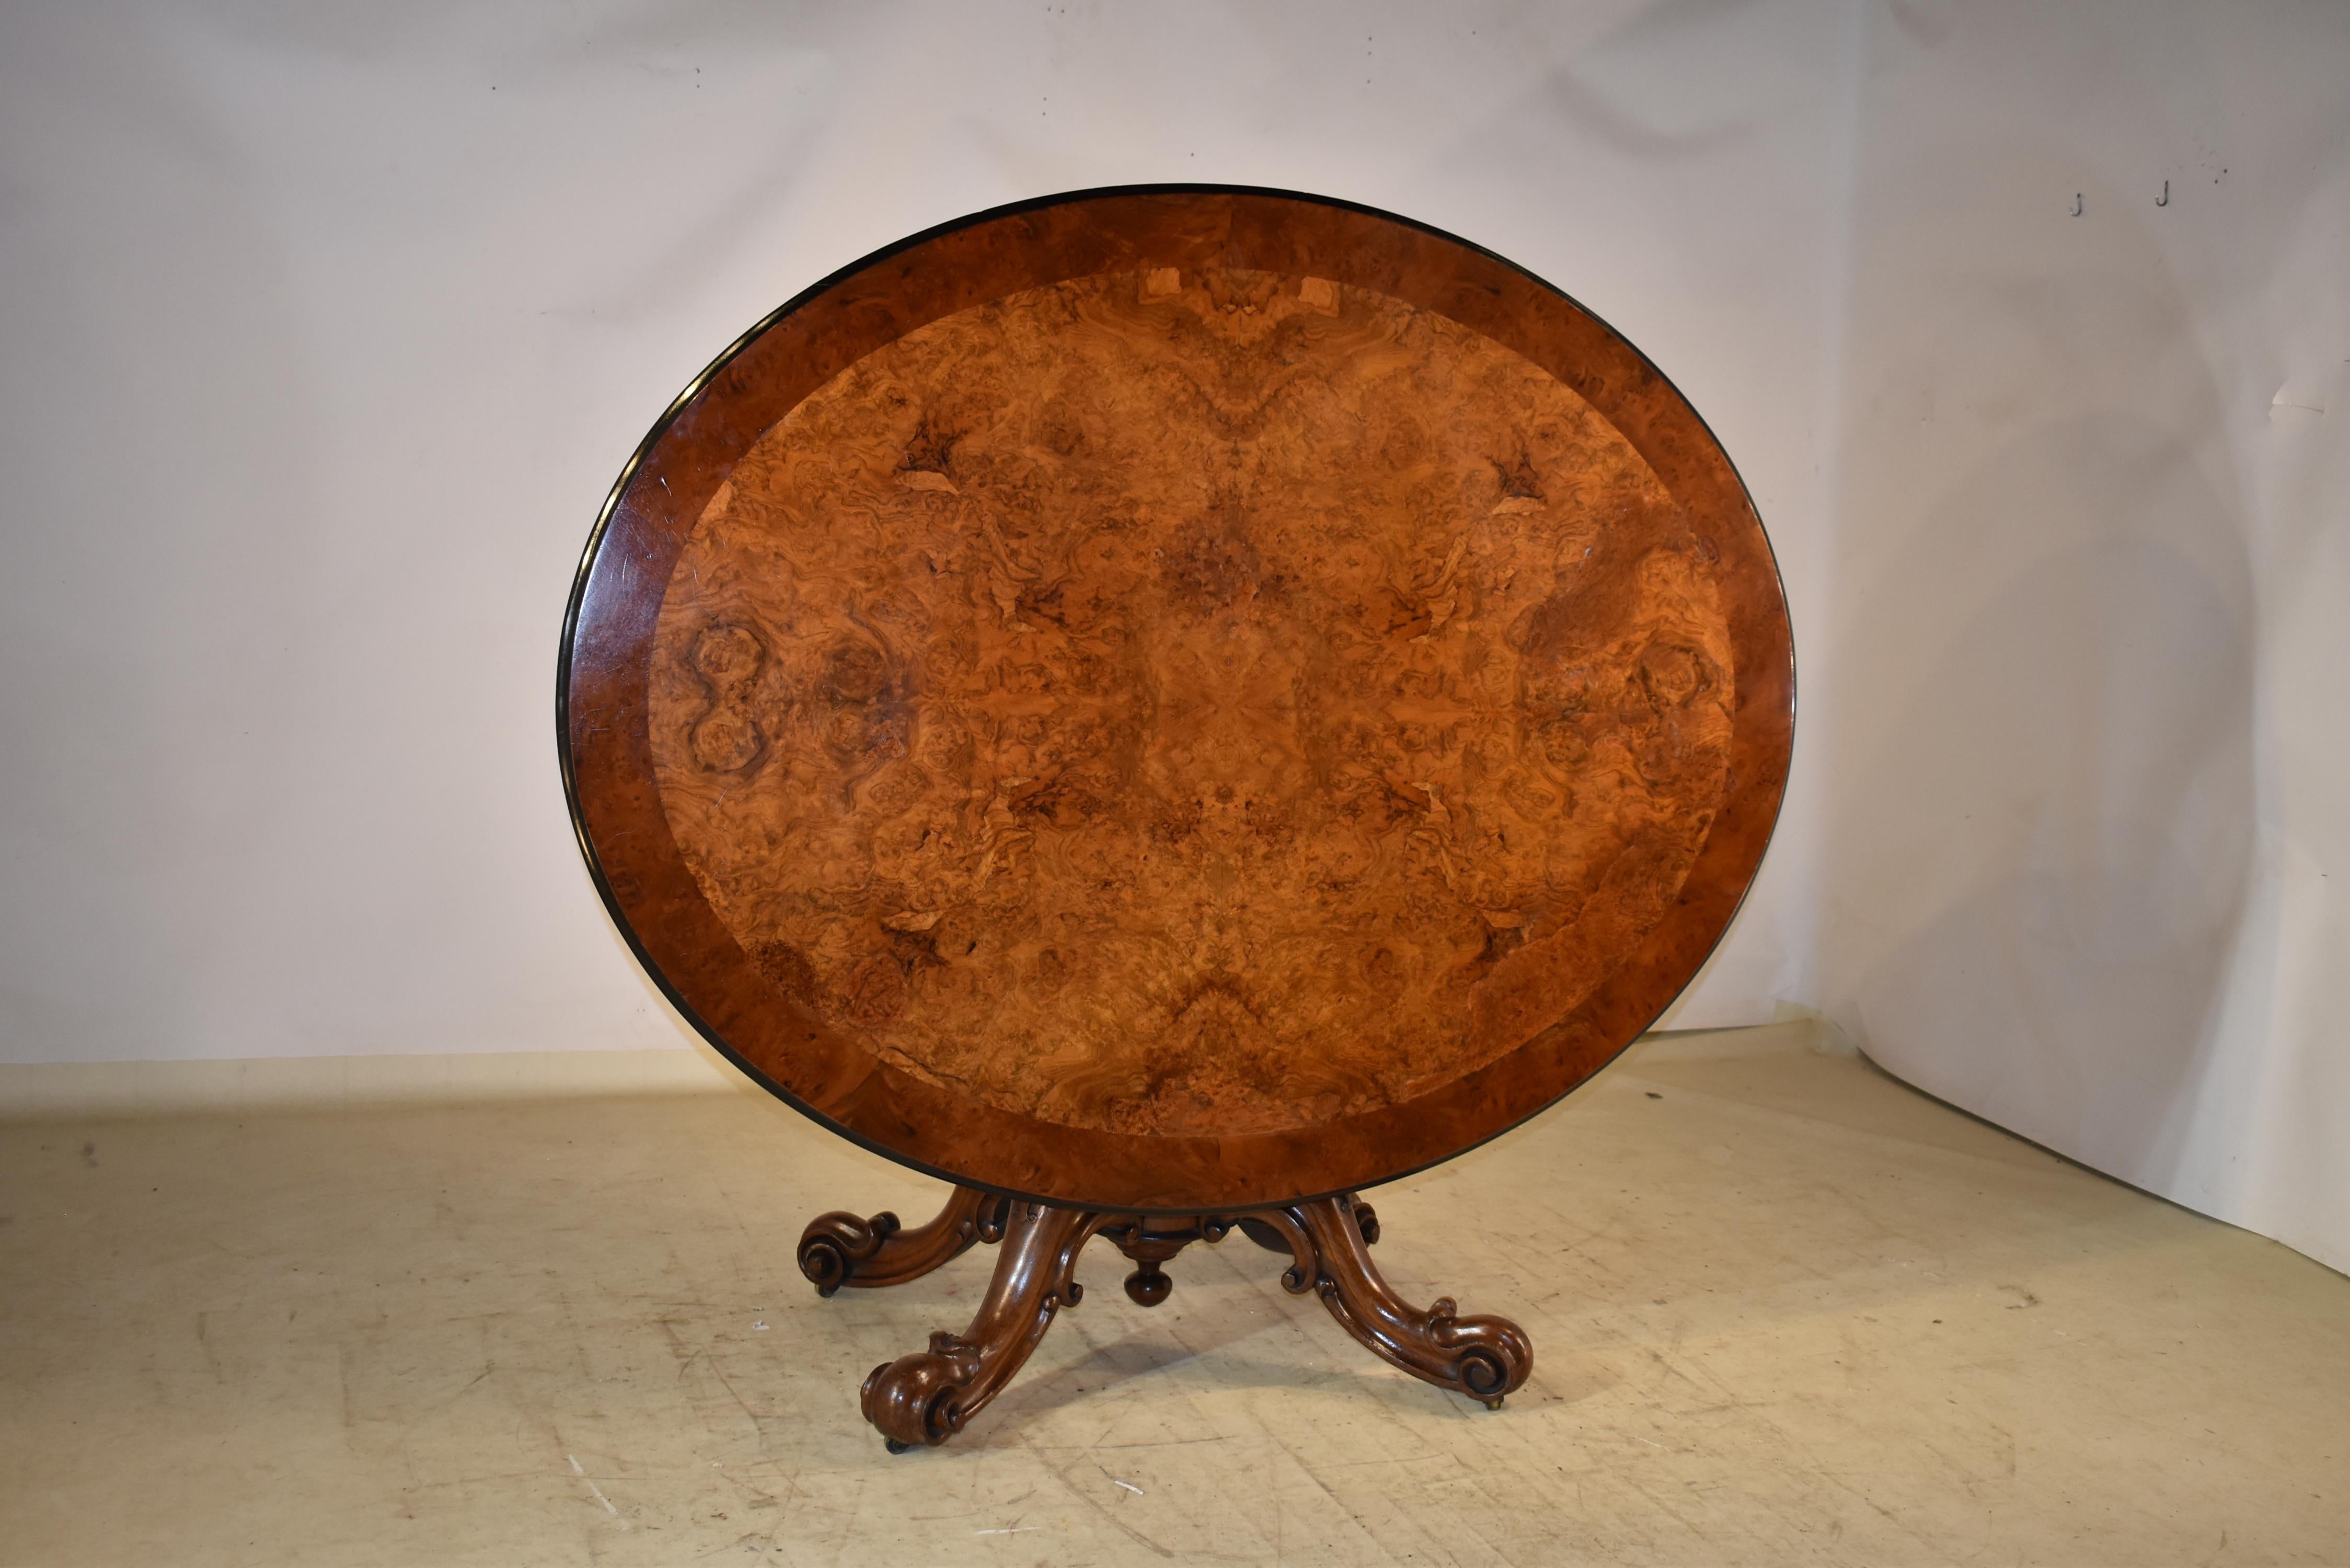 Fantastic 19th century tilt-top breakfast table from England.  The table is made from wonderfully grained burl walnut and walnut timber.  The top has a beveled edge, surrounding the most glorious burl walnut top, banded in burled walnut in a darker